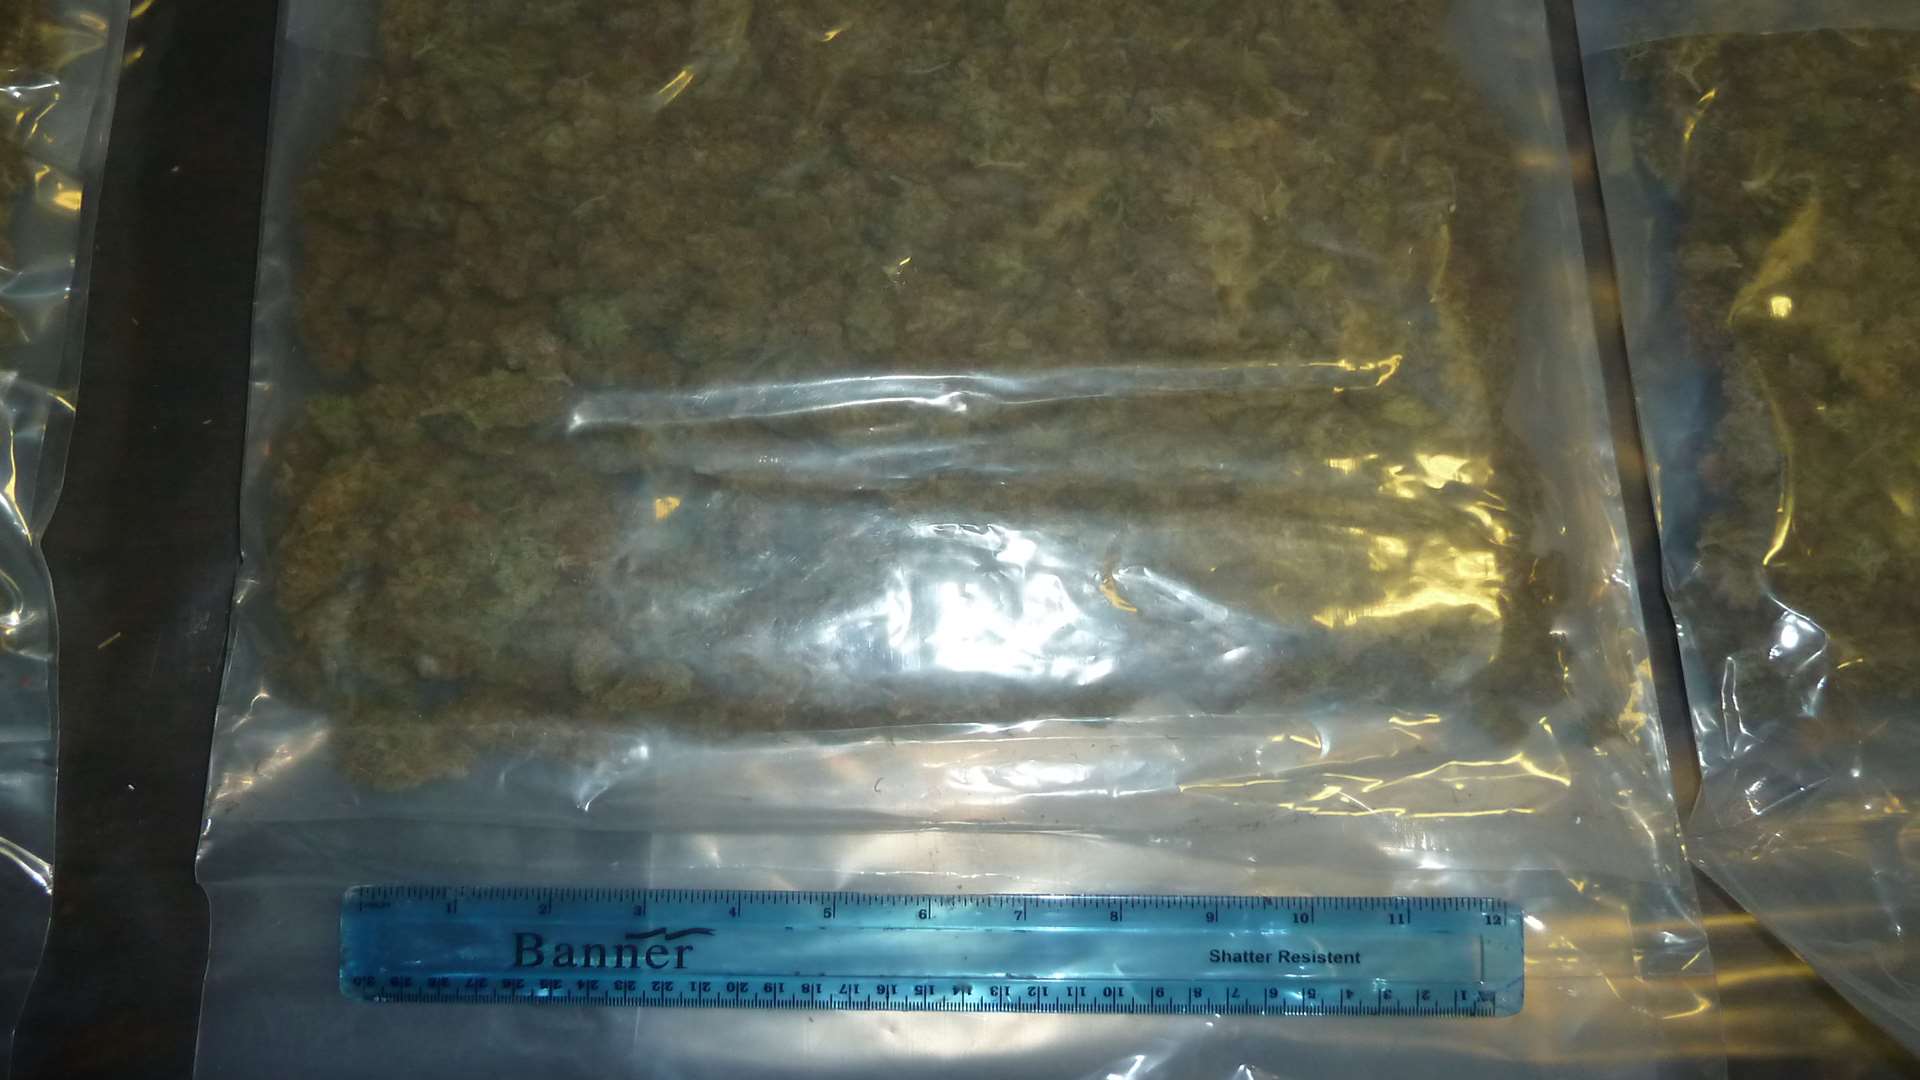 Herbal cannabis found in a van at Dover docks. Picture courtesy of the Home Office